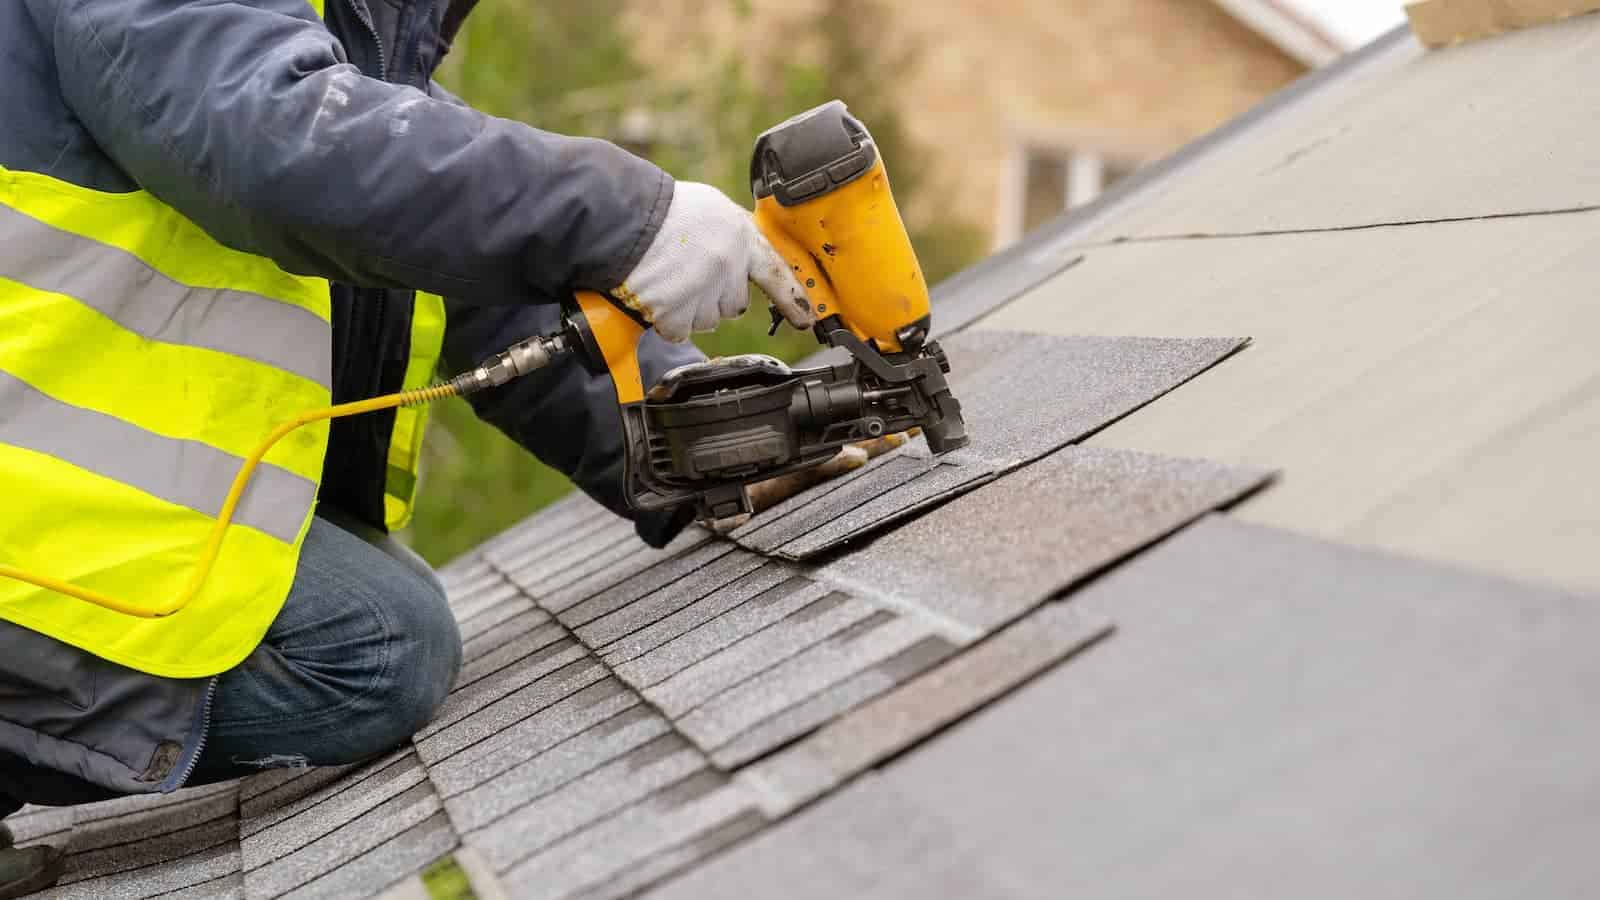 Roofing Solutions